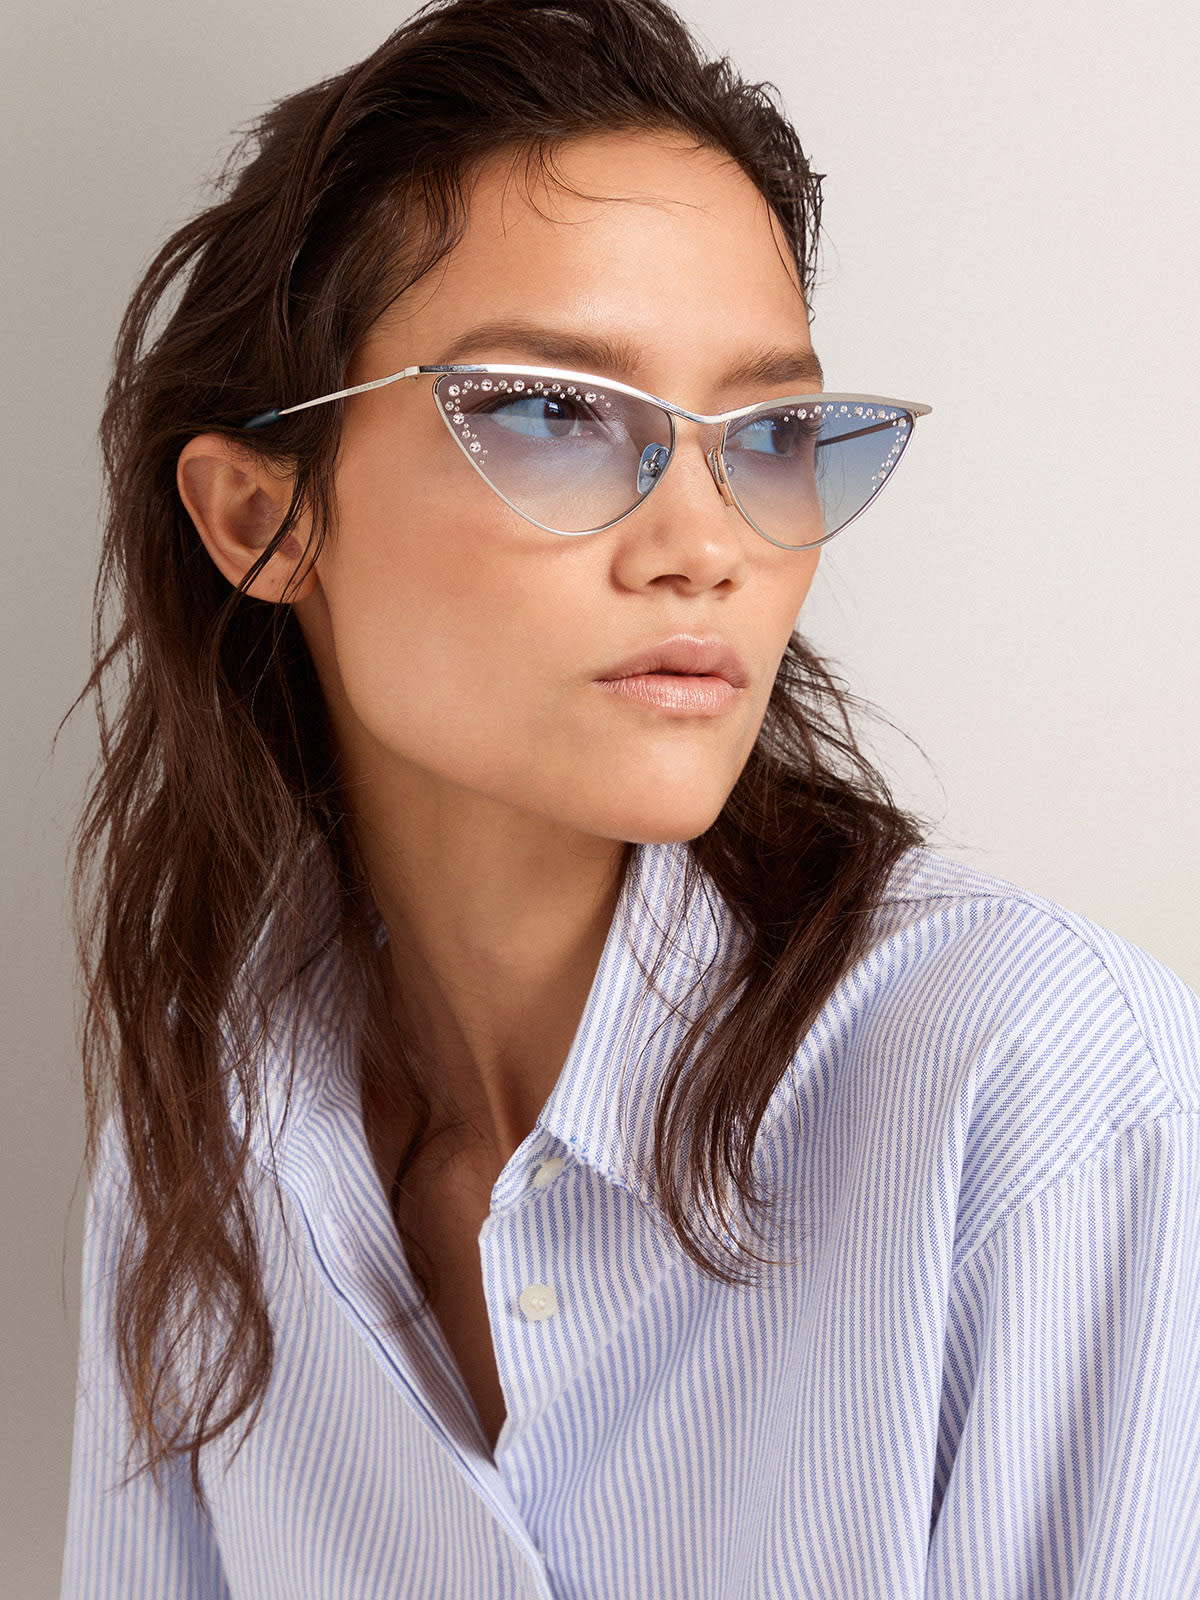 Golden Goose - Sunglasses cat-eye style with silver frame and crystals in 